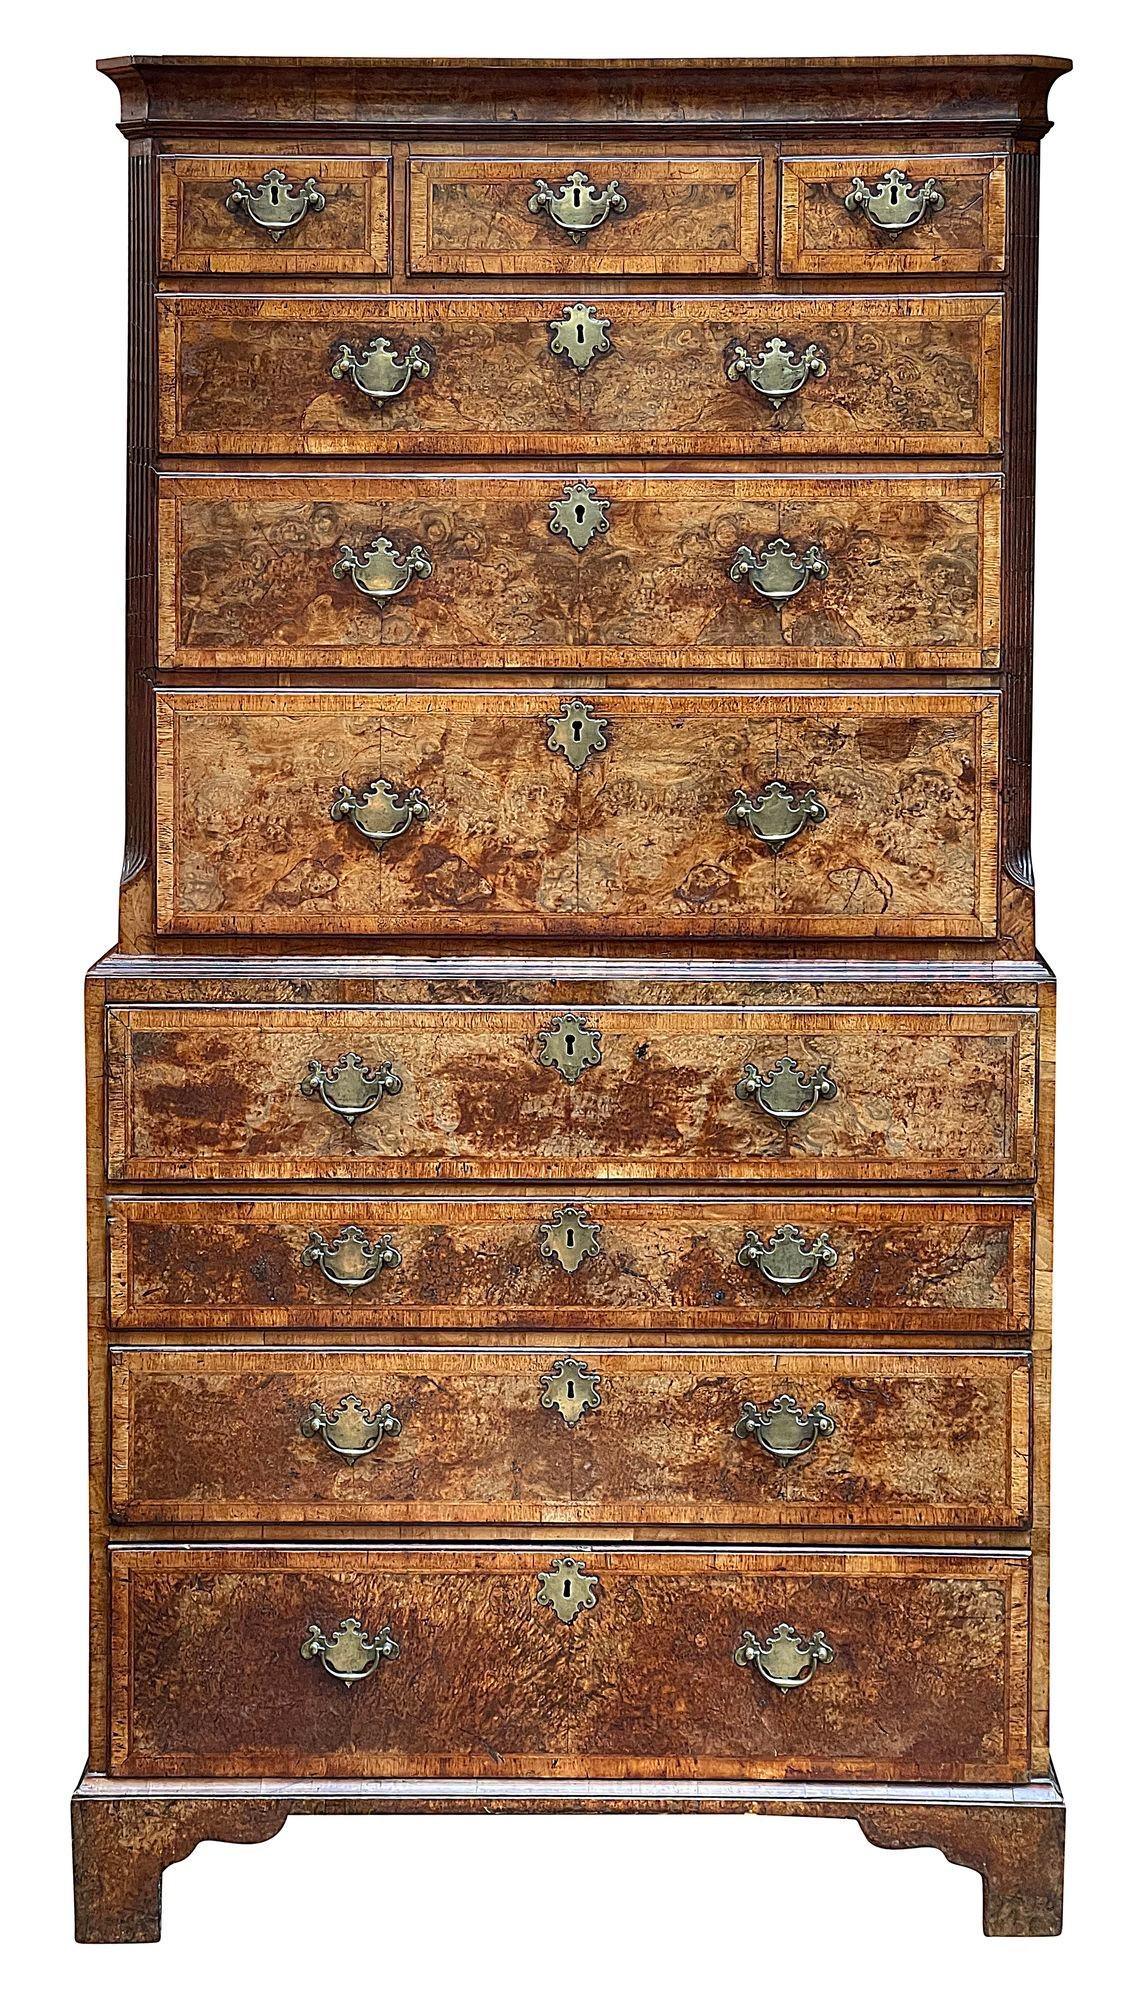 A fine quality and rare Georgian period Walnut Tallboy with a secretaire drawer, having wonderful fluted canted corners, having the original brass handles to the drawer fronts and side carrying handles. Crossbanded drawer fronts, Oak lined and